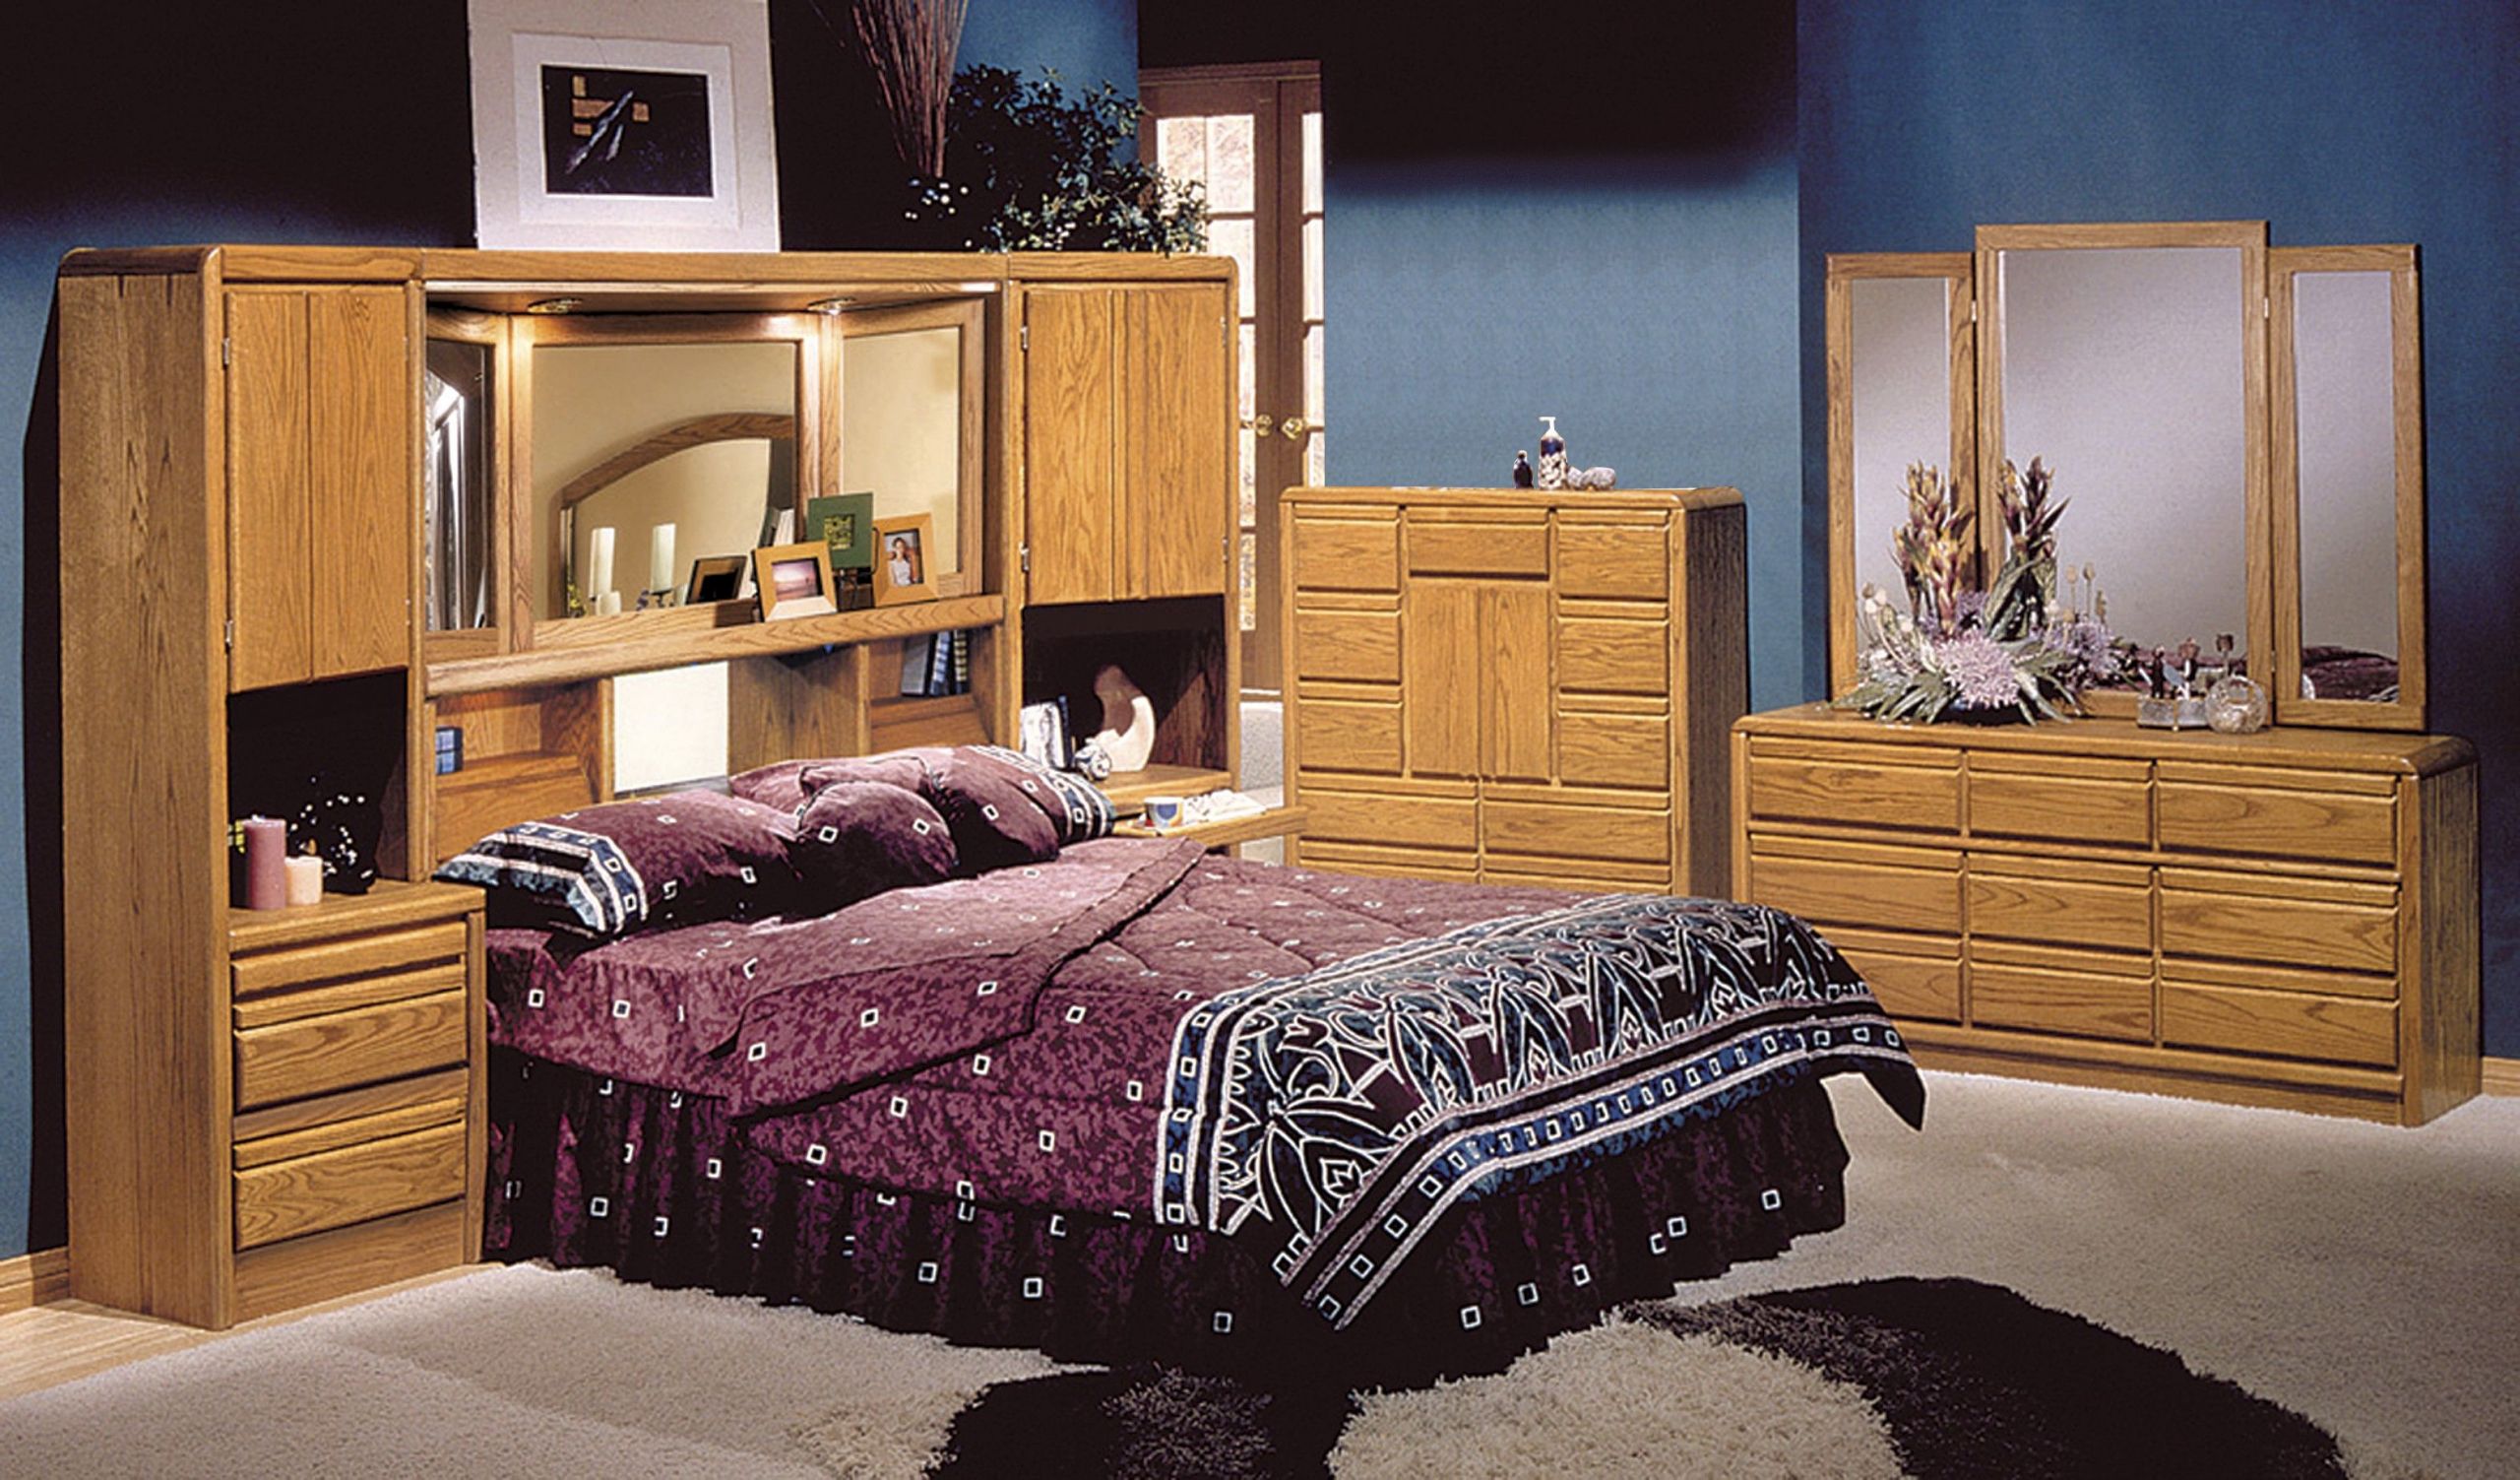 Wall Unit Bedroom Sets
 Astonishing Bedroom Wall Units for Interior and Decoration